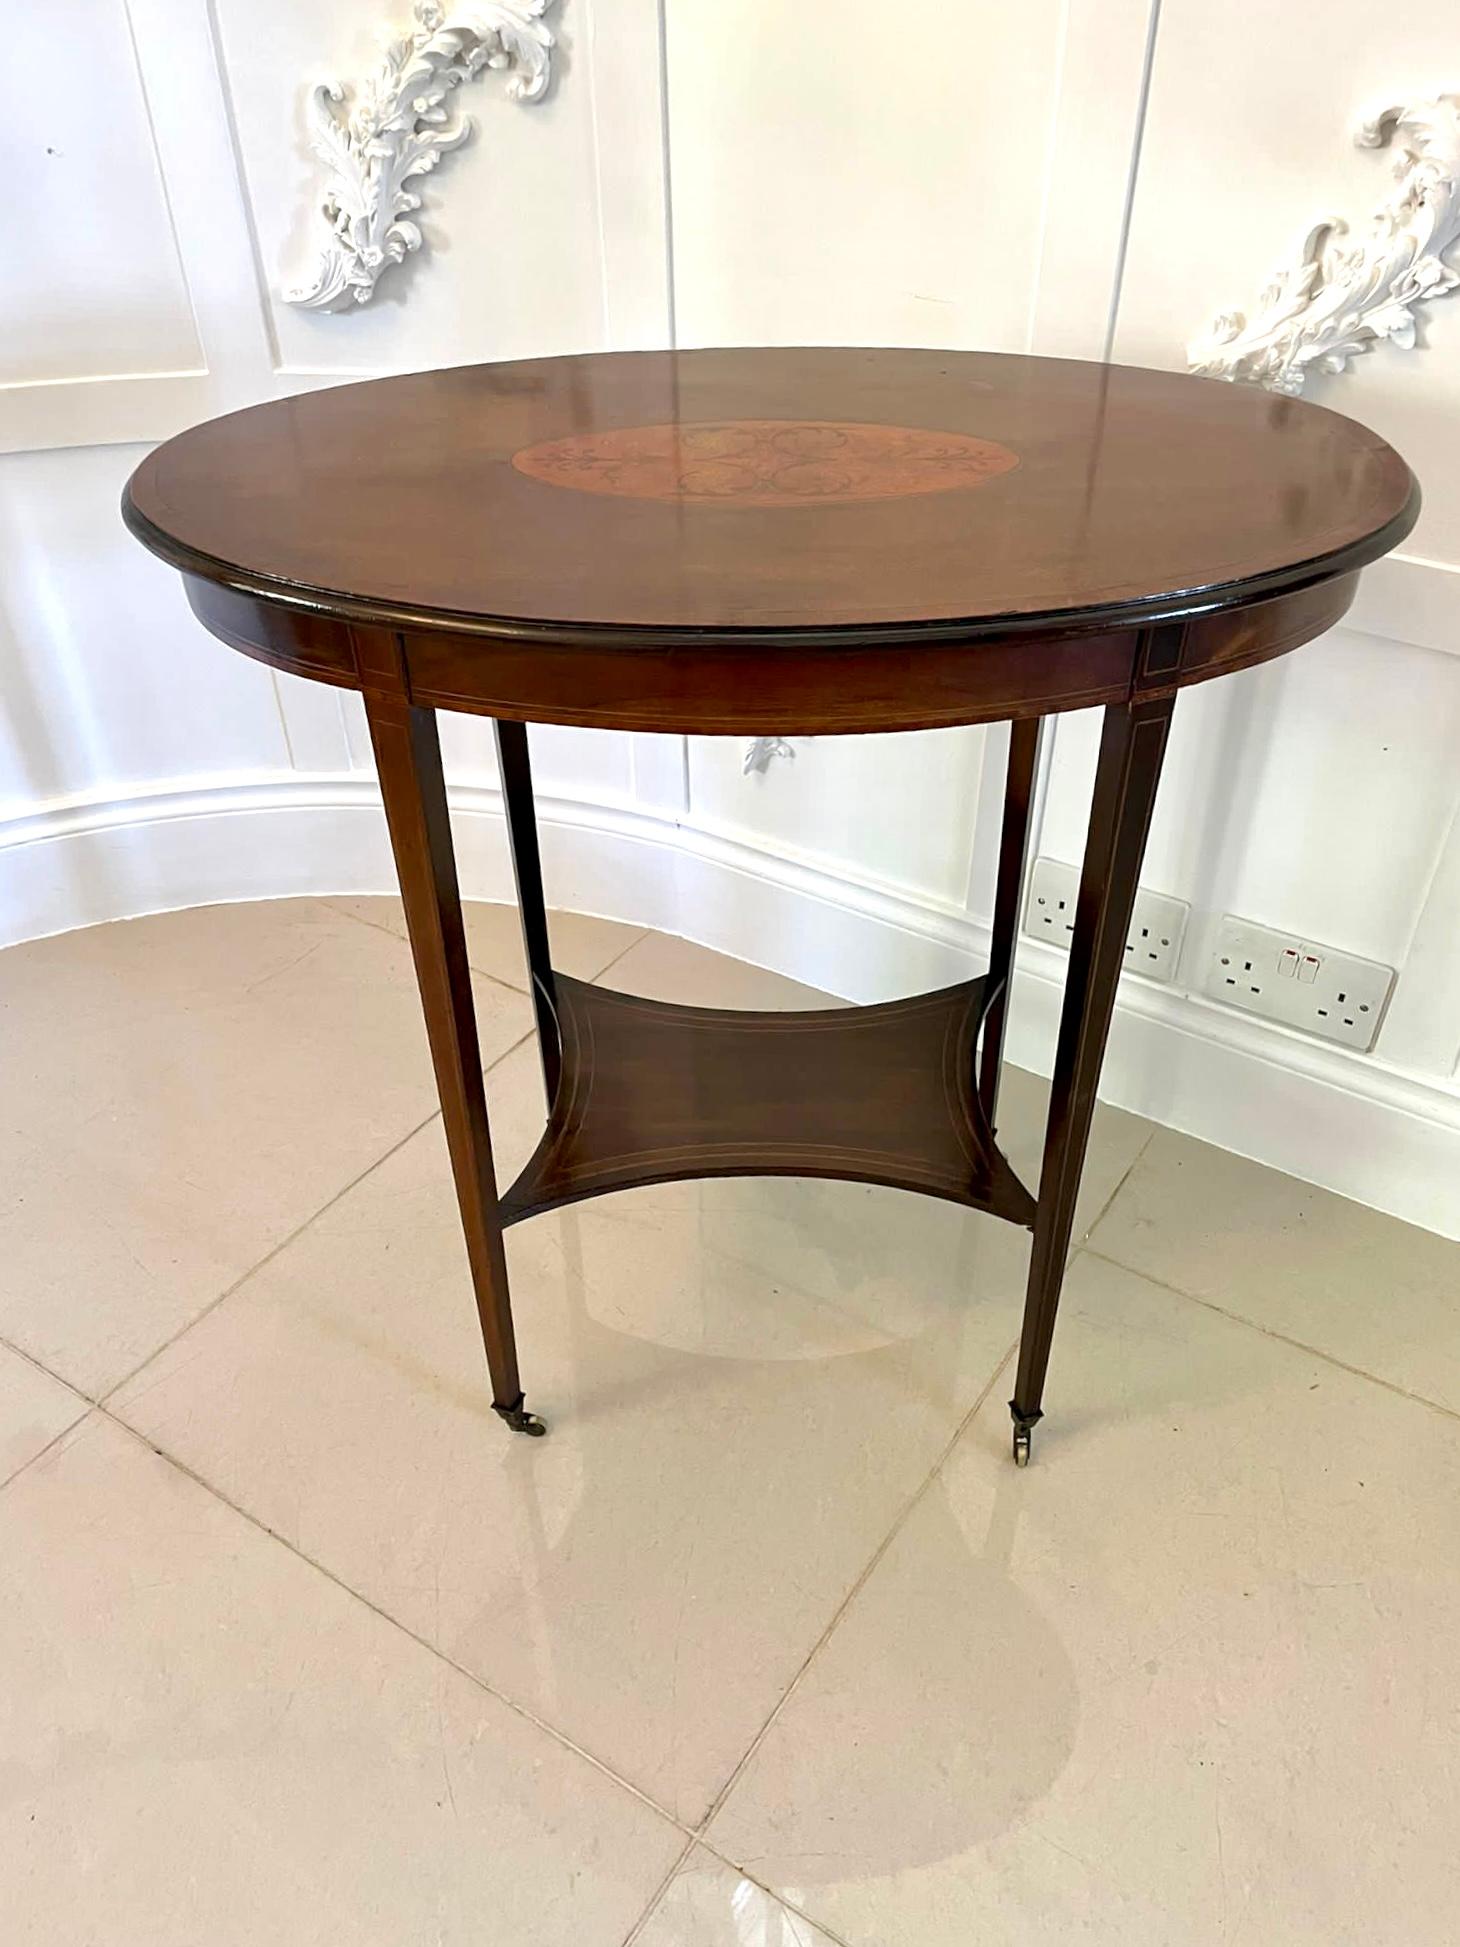 Antique Edwardian Oval Quality Mahogany Inlaid Lamp Table In Good Condition For Sale In Suffolk, GB